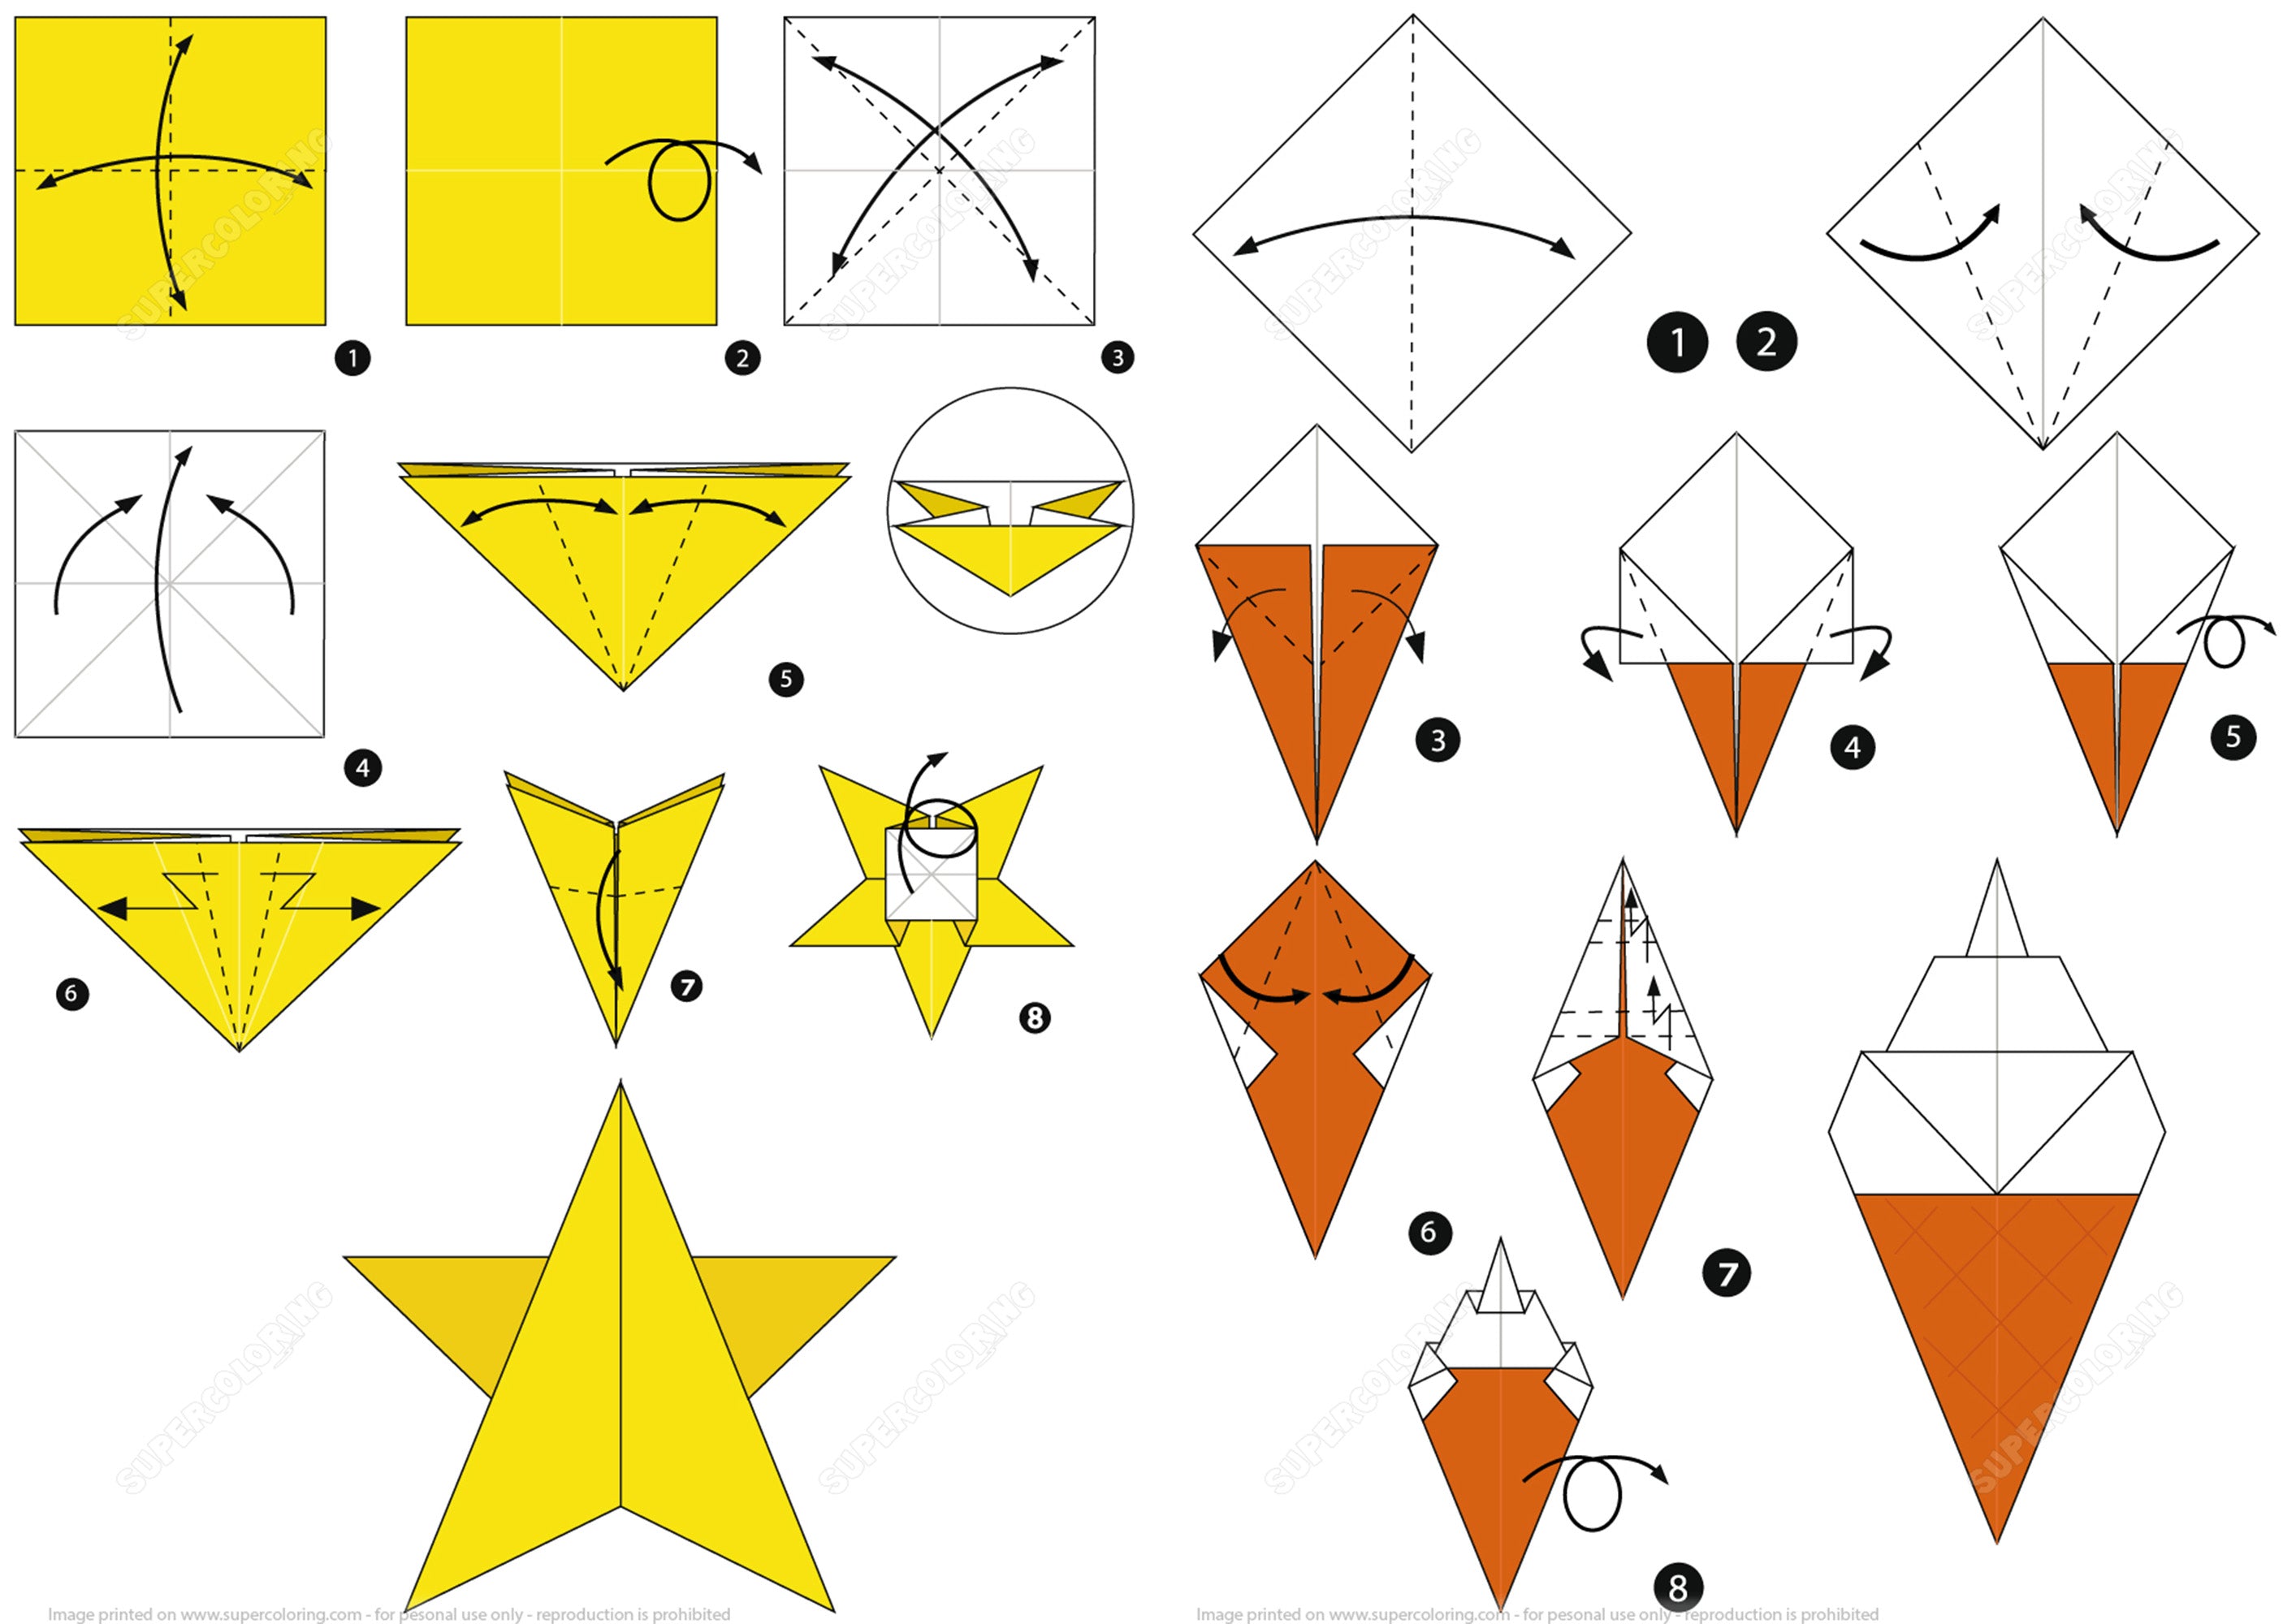 Instructions on how to fold an origami star shape on the left, instructions on how to fold an origami ice cream cone